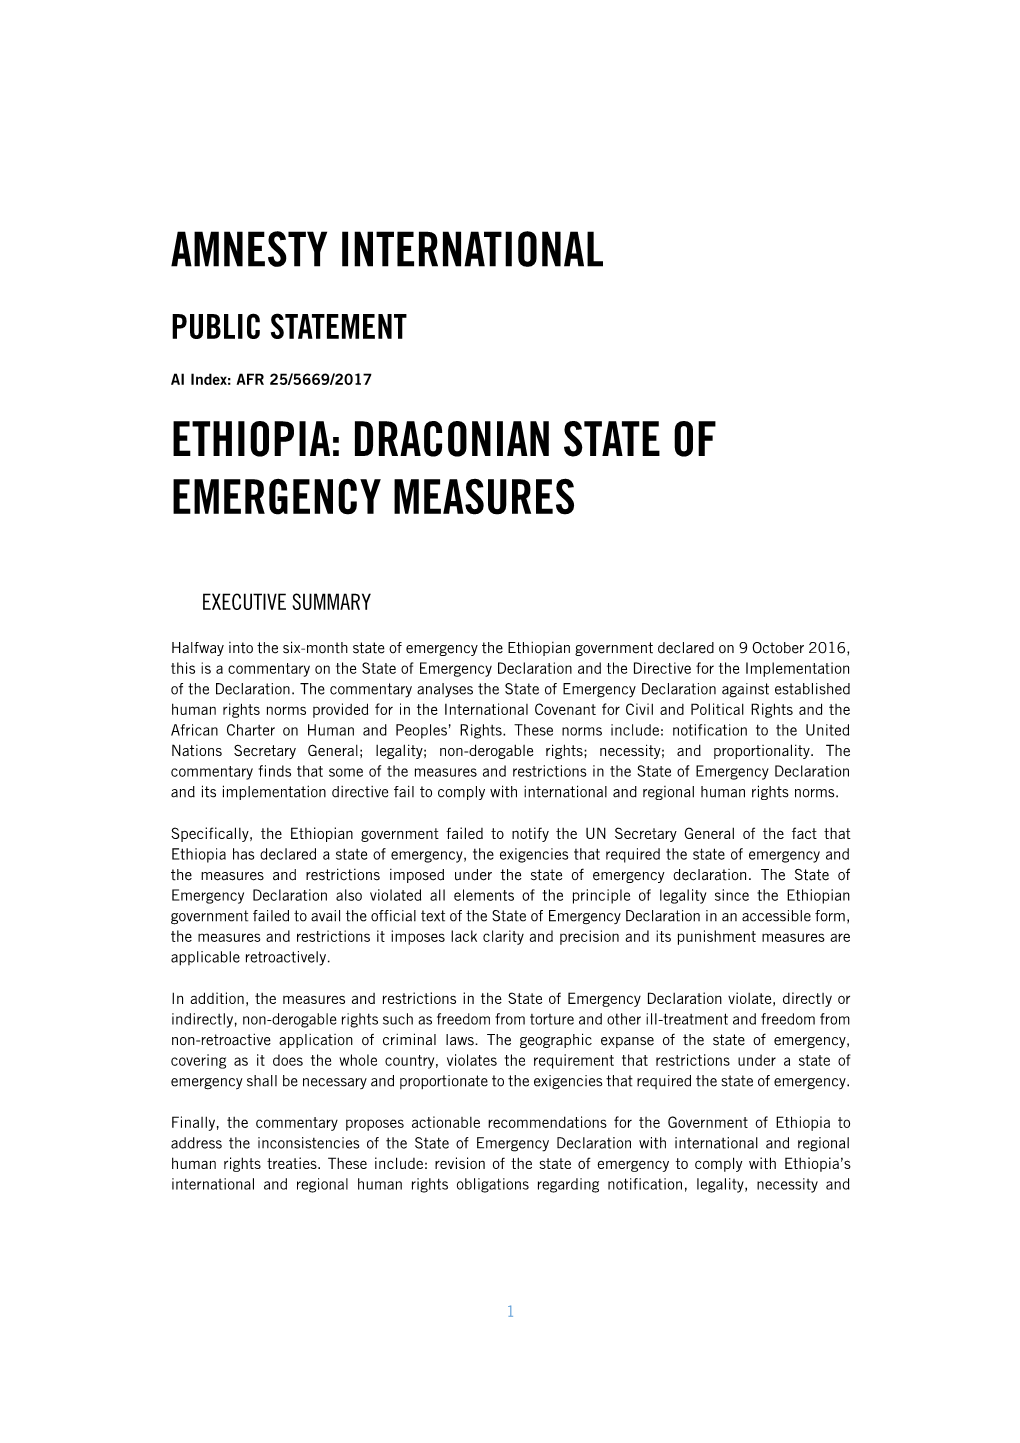 Ethiopia: Draconian State of Emergency Measures